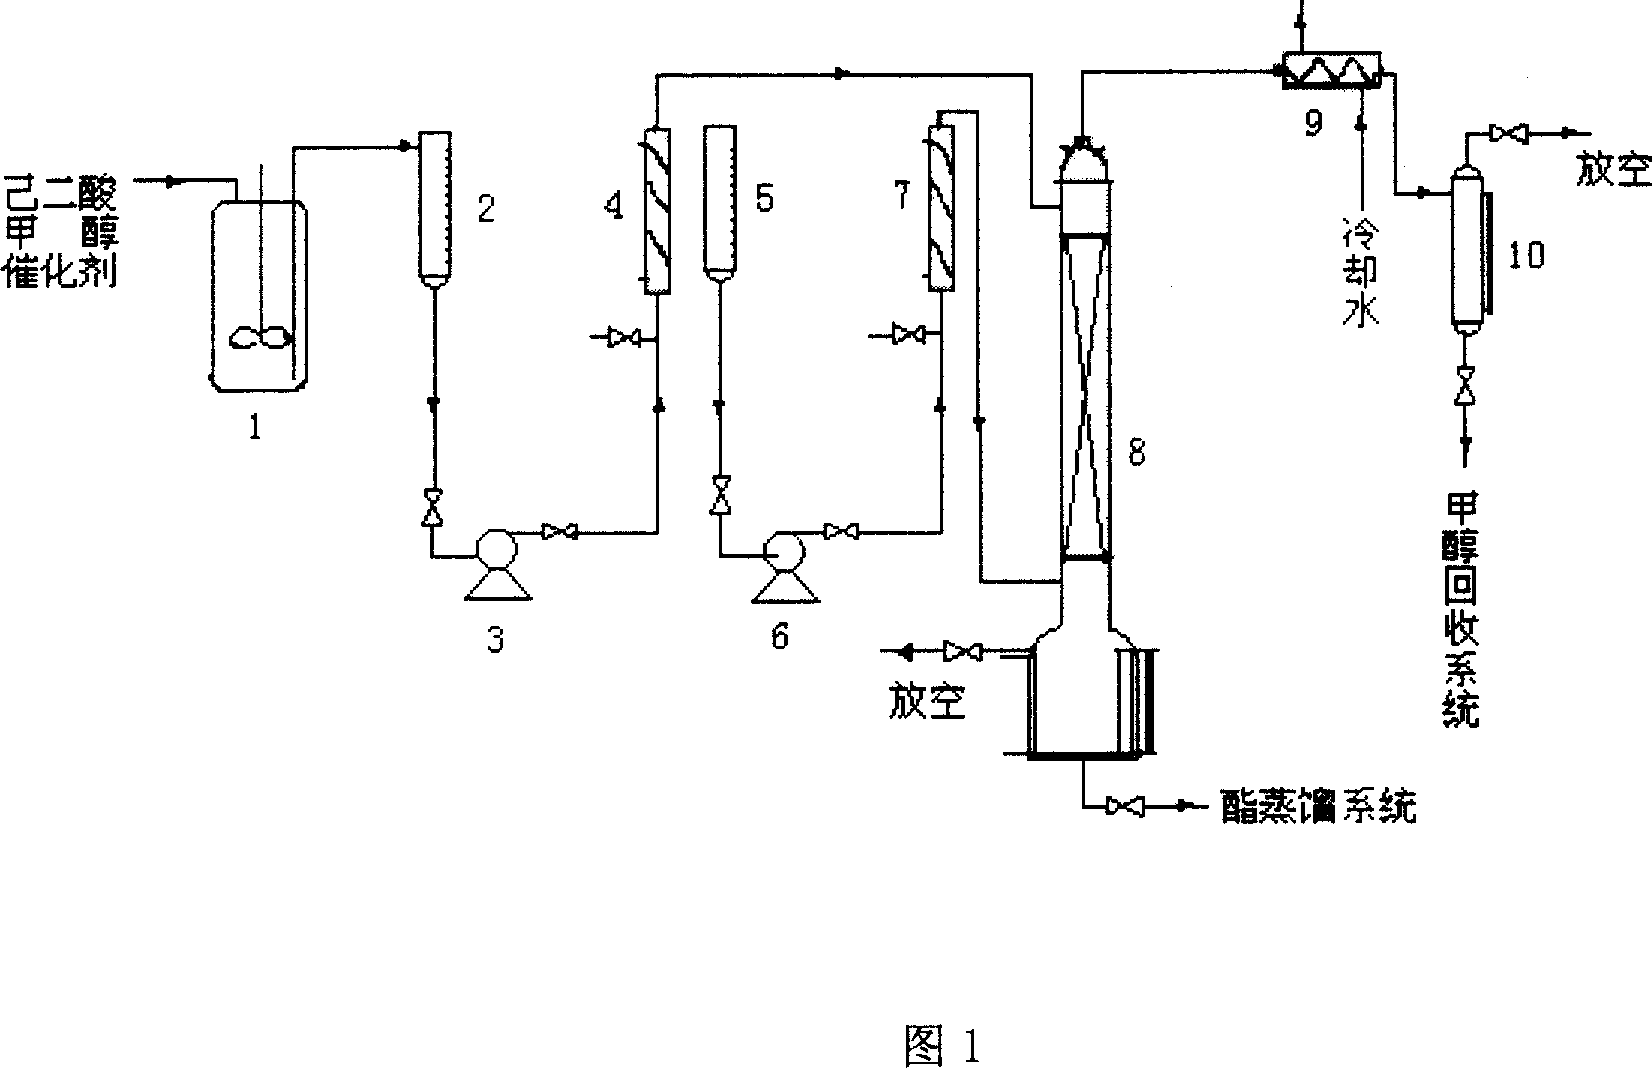 Method and equipment for continuous esterification production of adipic acid dimethyl ester